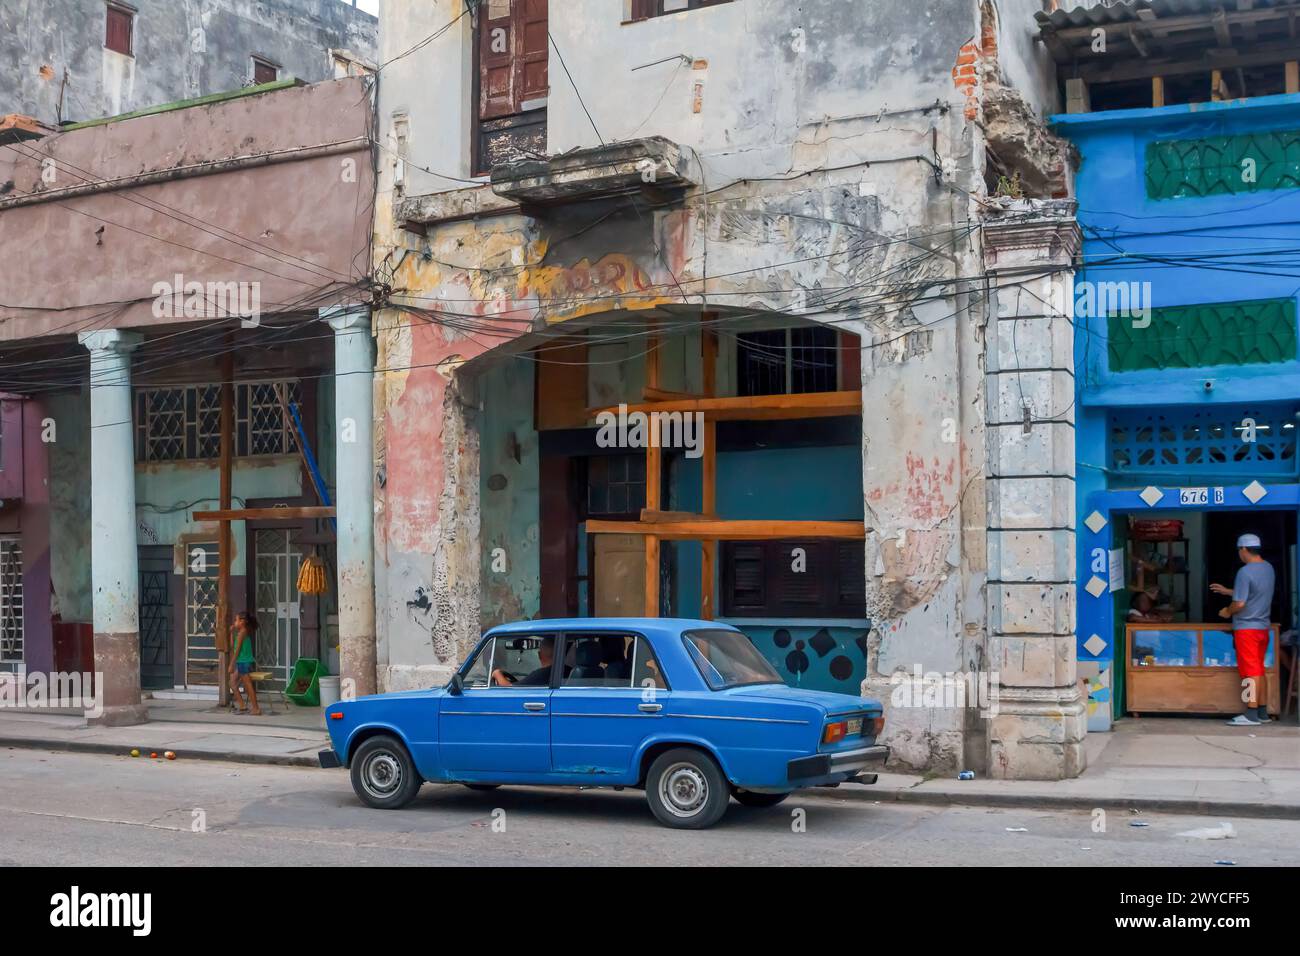 Lada car by weathered damaged facade of buildings in Havana, Cuba Stock Photo